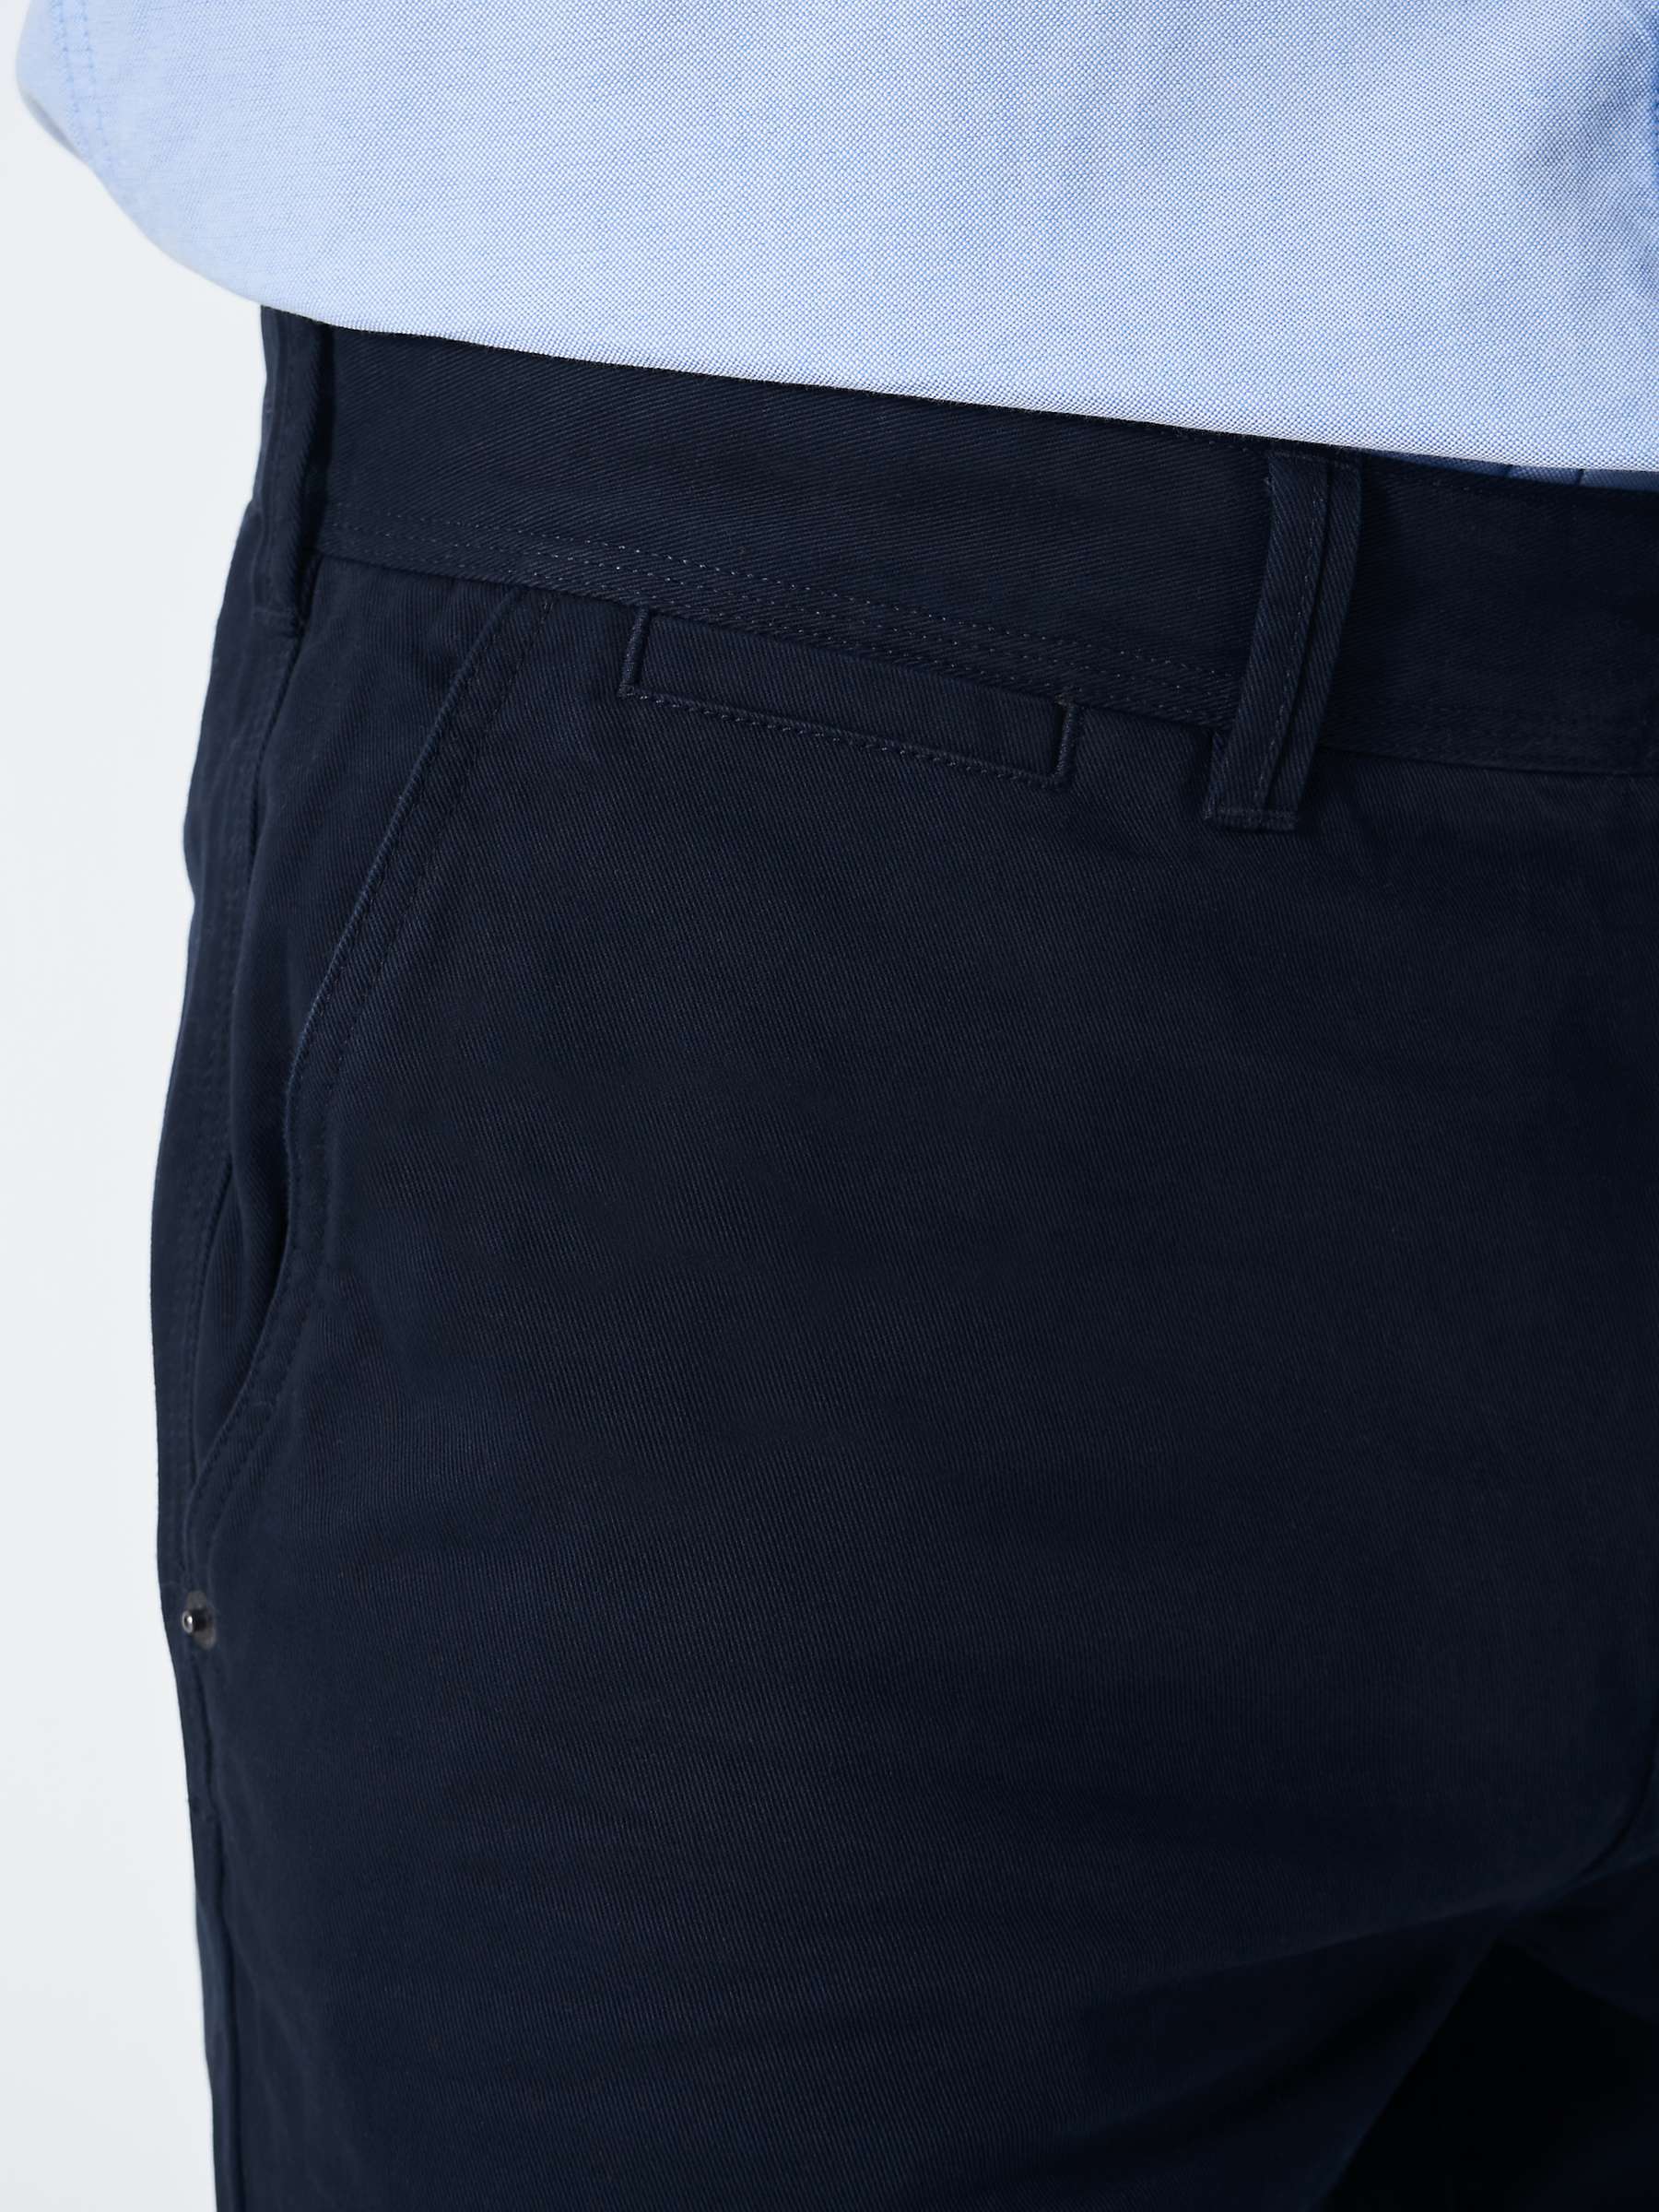 Buy Crew Clothing Vintage Chinos, Navy Online at johnlewis.com